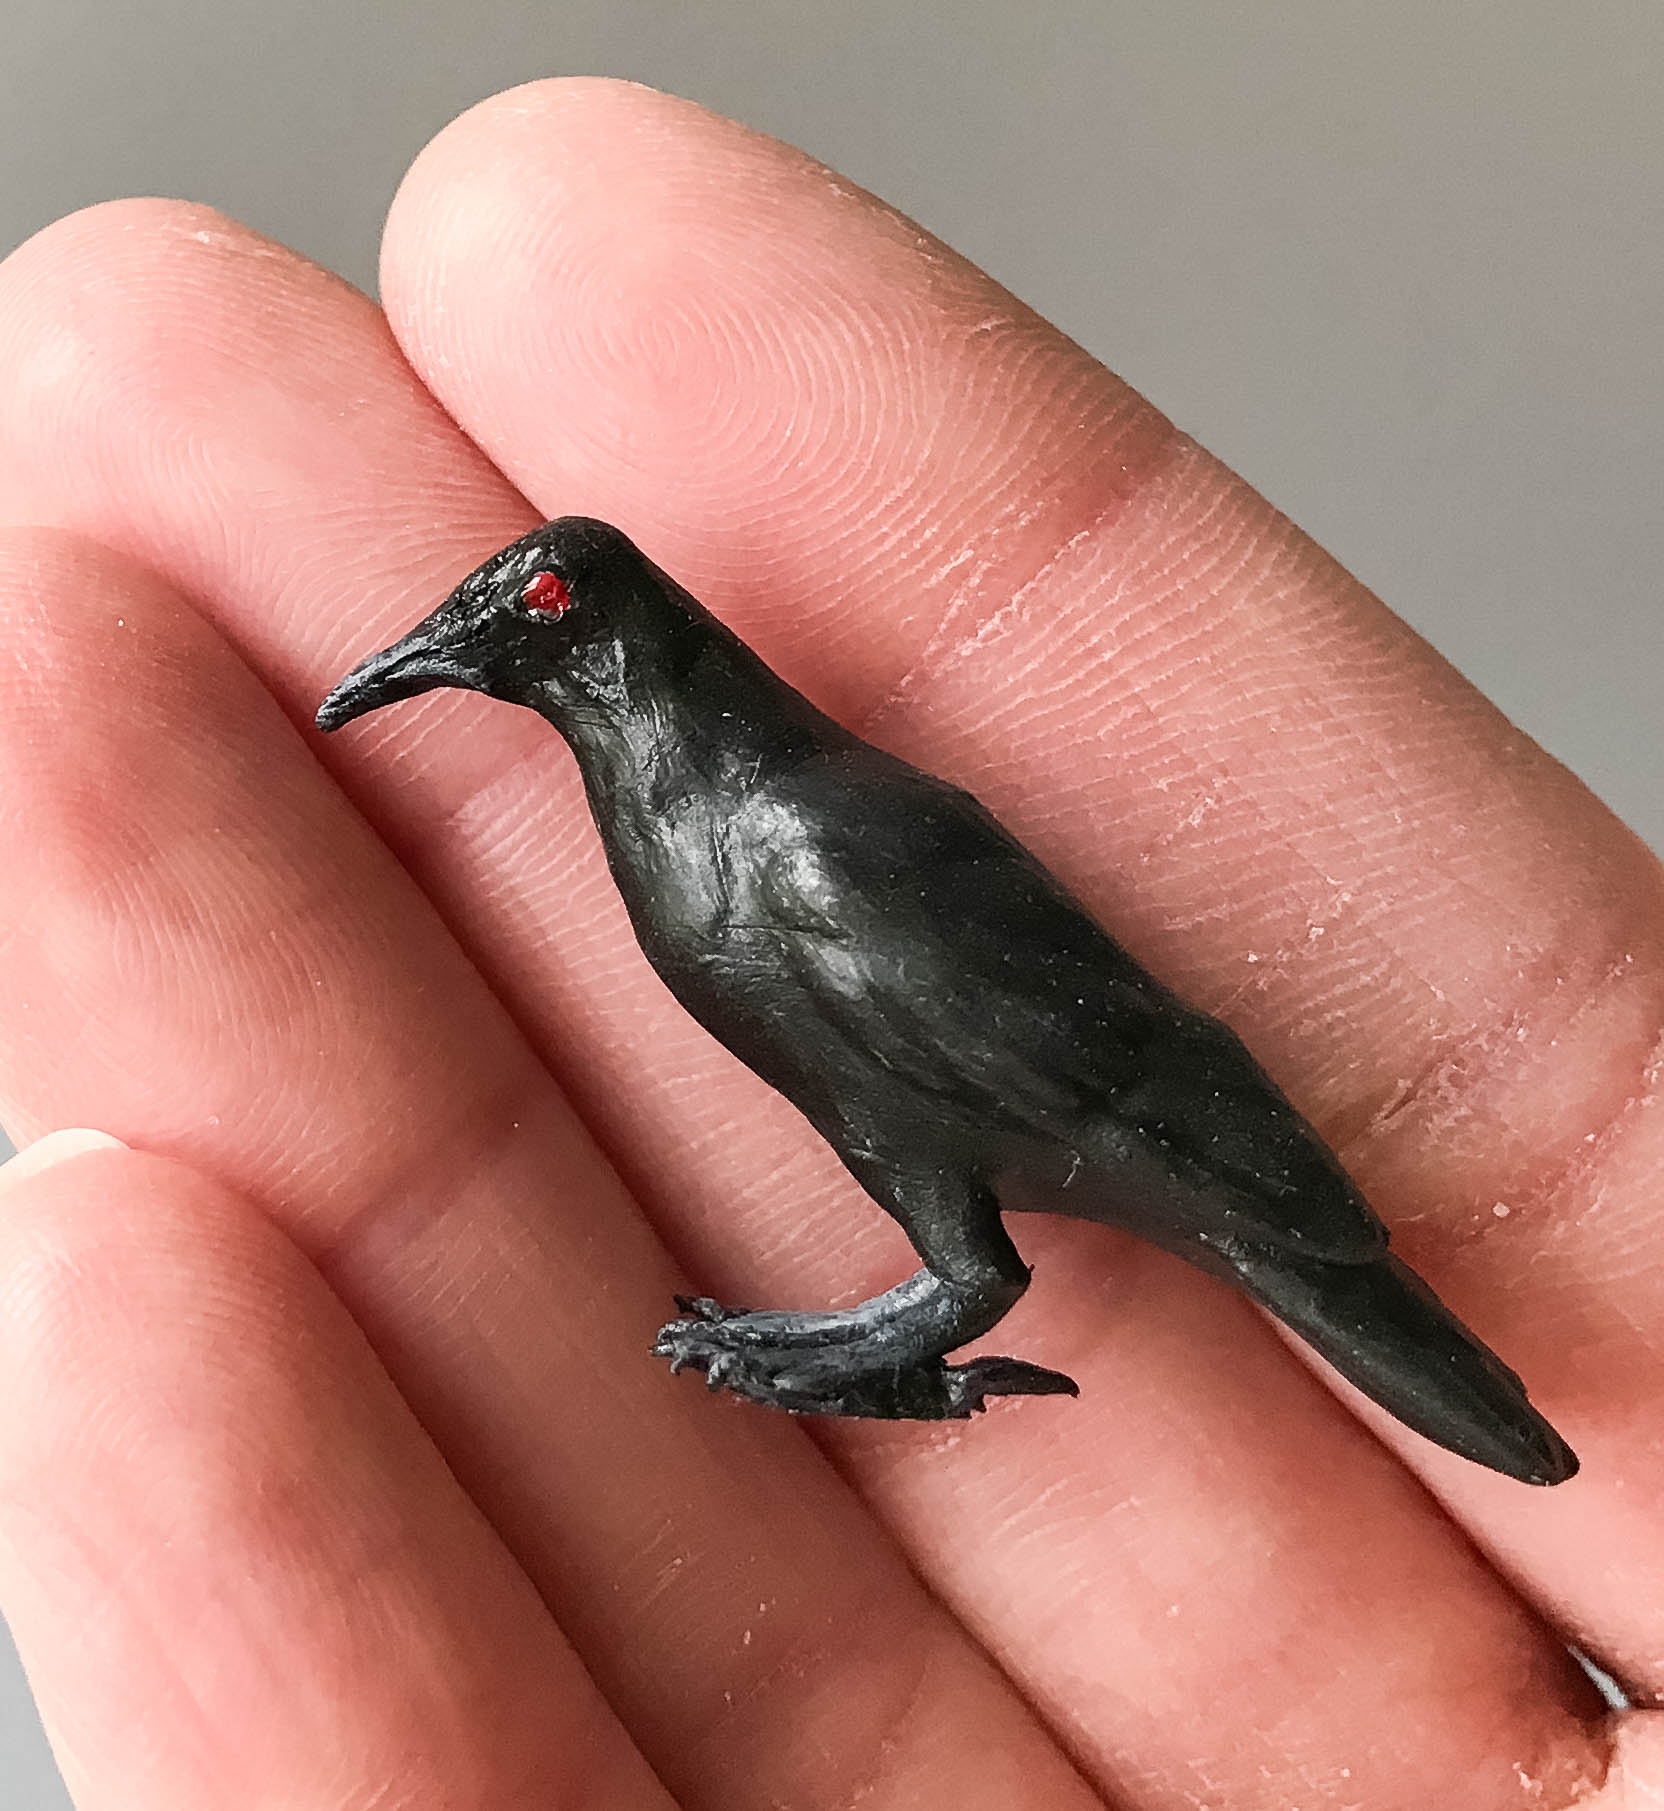 Red eyed Crow in 1:12 scale